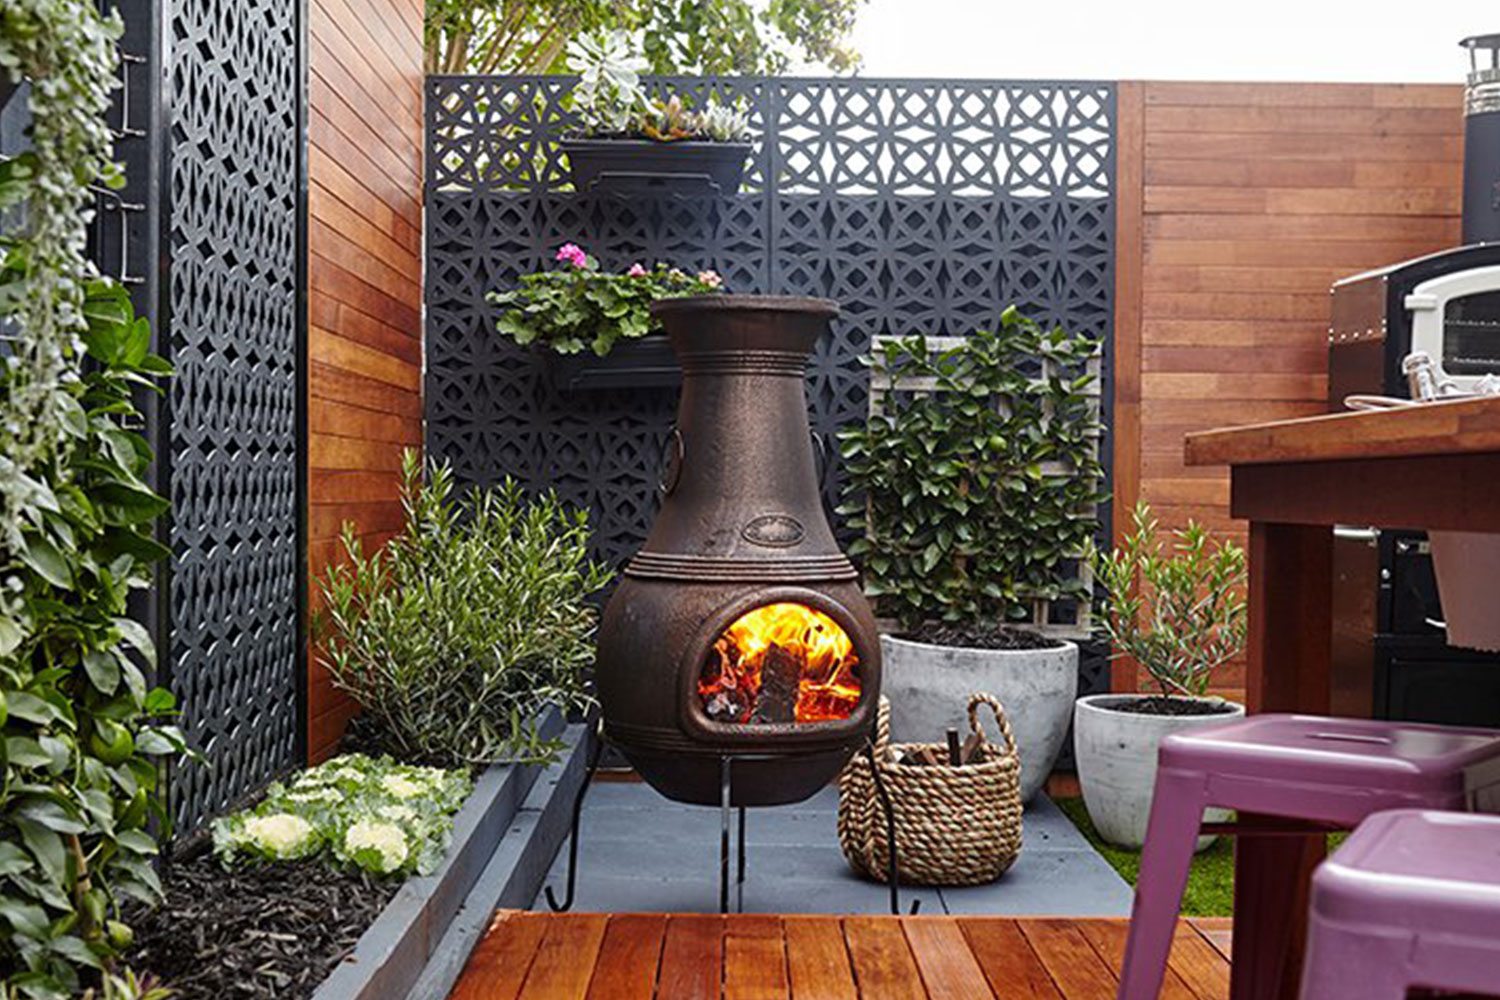 How to choose a decorative outdoor screen for your garden ...